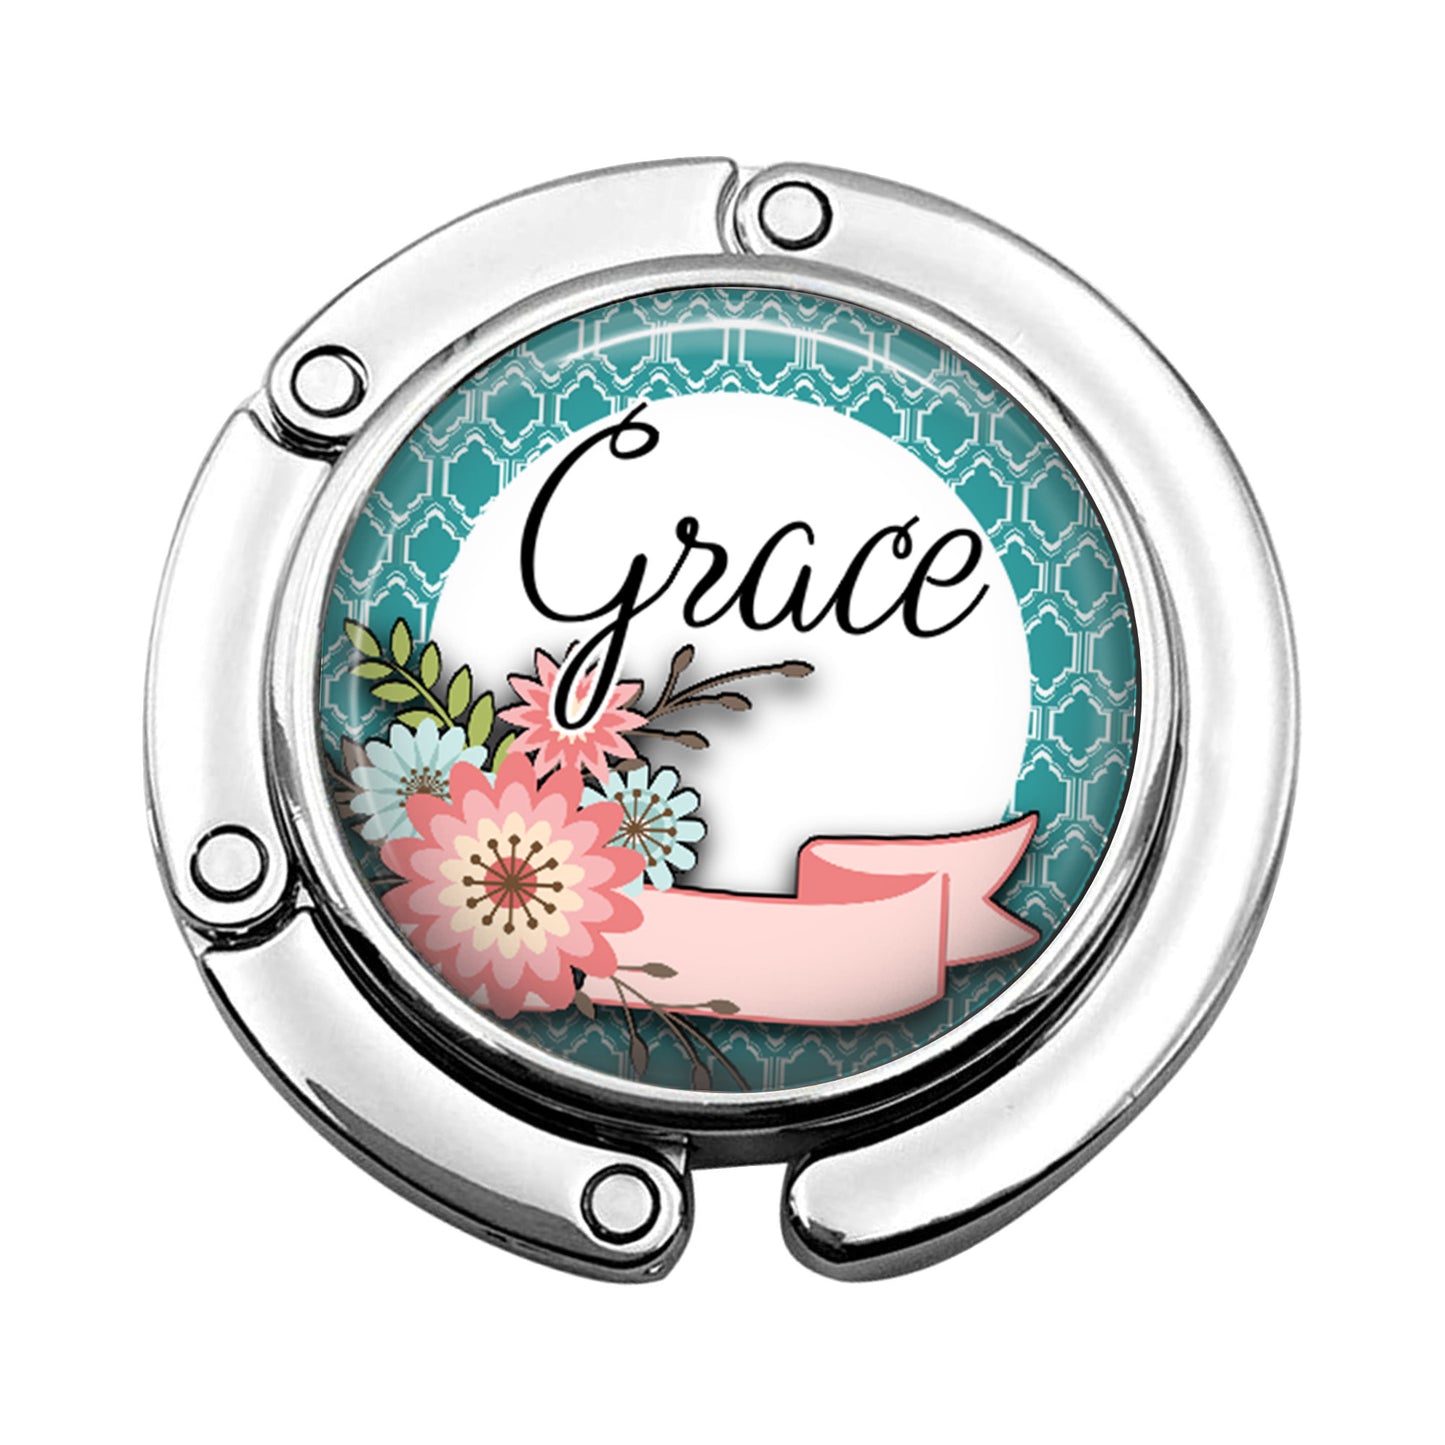 a badge with the word grace on it